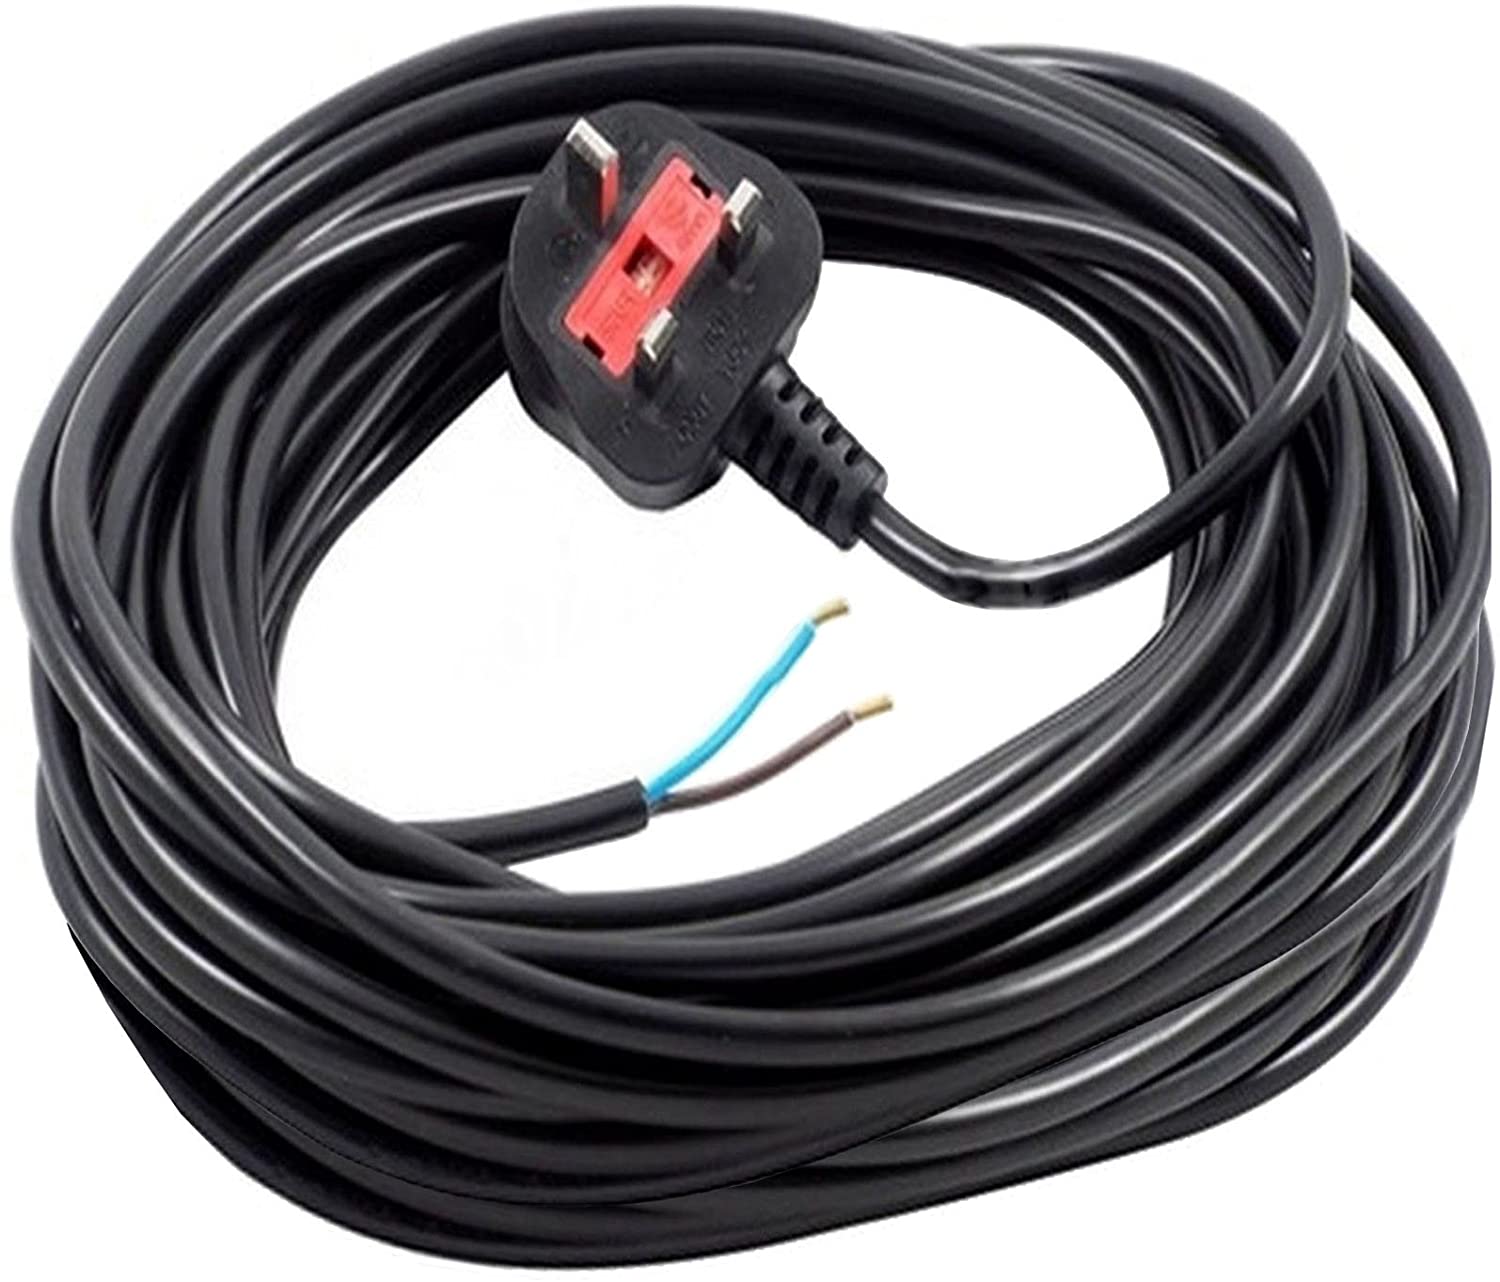 XL Extra Long 12M Metre Black Cable Mains Power Lead for Hoover Vacuum Cleaner (UK Plug)